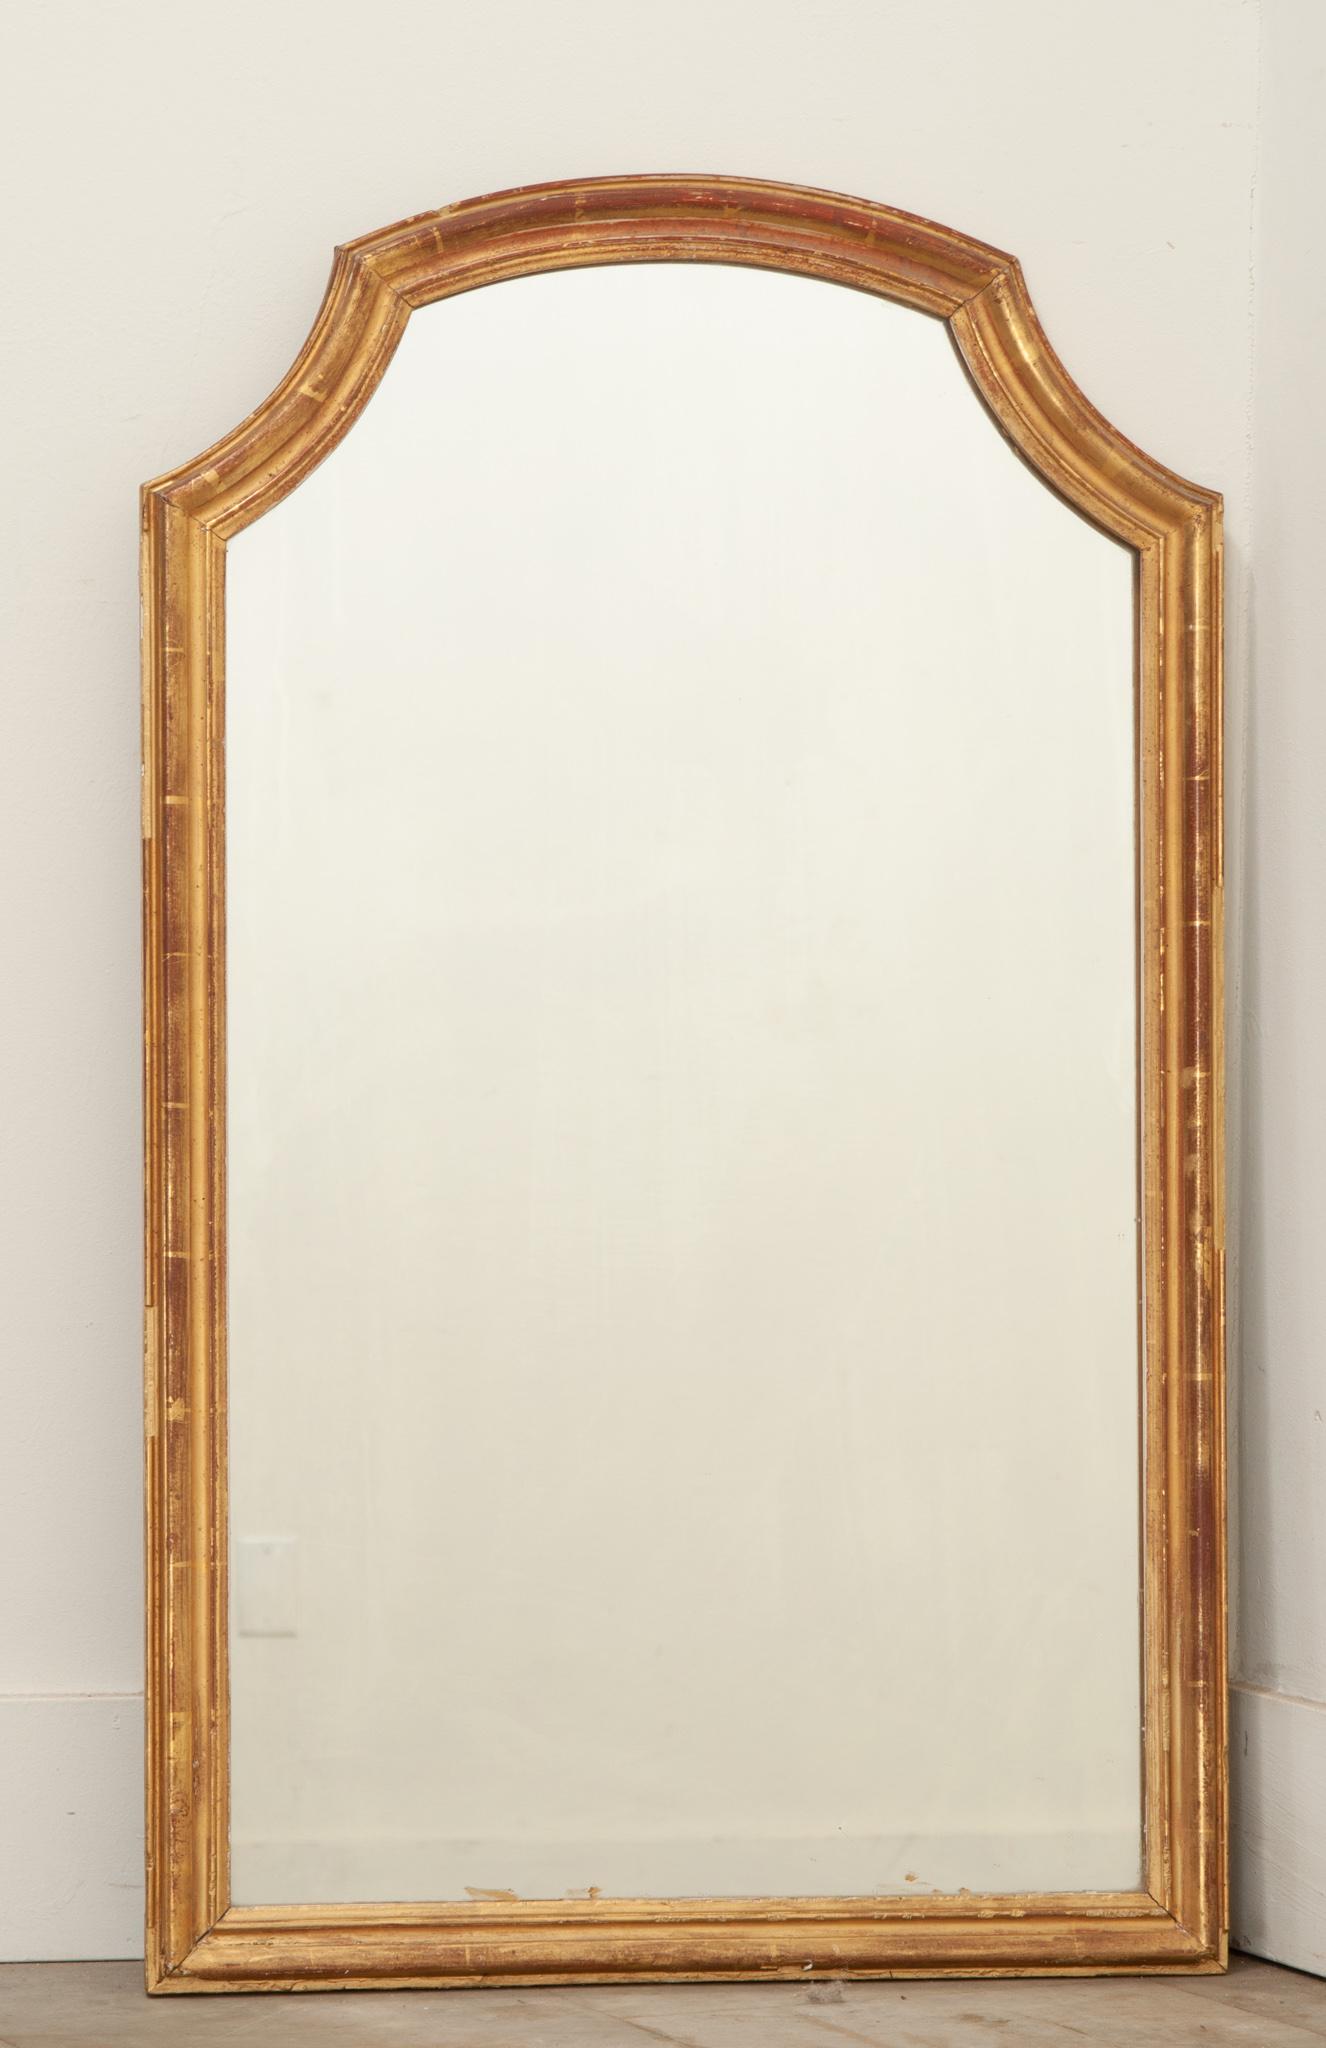 A petite giltwood mirror made in France. The mirror plate is surrounded by a simple gold gilt frame with a convex arch at the top. The original gilding shows patina revealing the reddish bole beneath, creating contrast to the gold finish. Be sure to